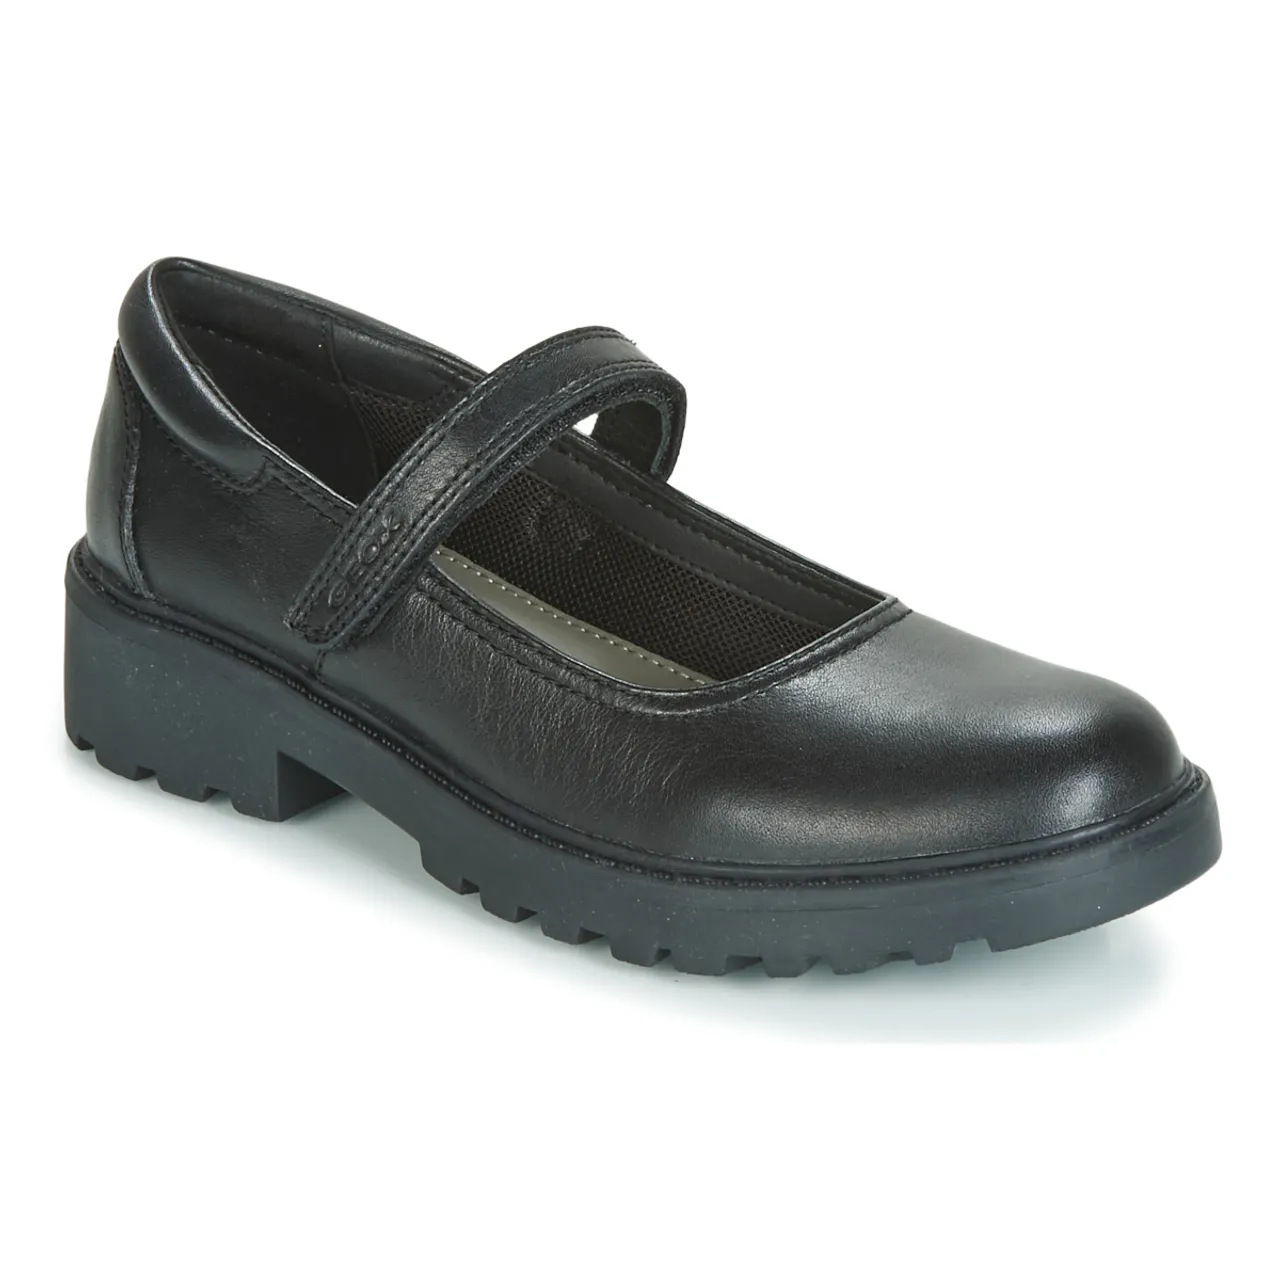 Geox  CASEY GIRL  girls's Children's Casual Shoes in Black